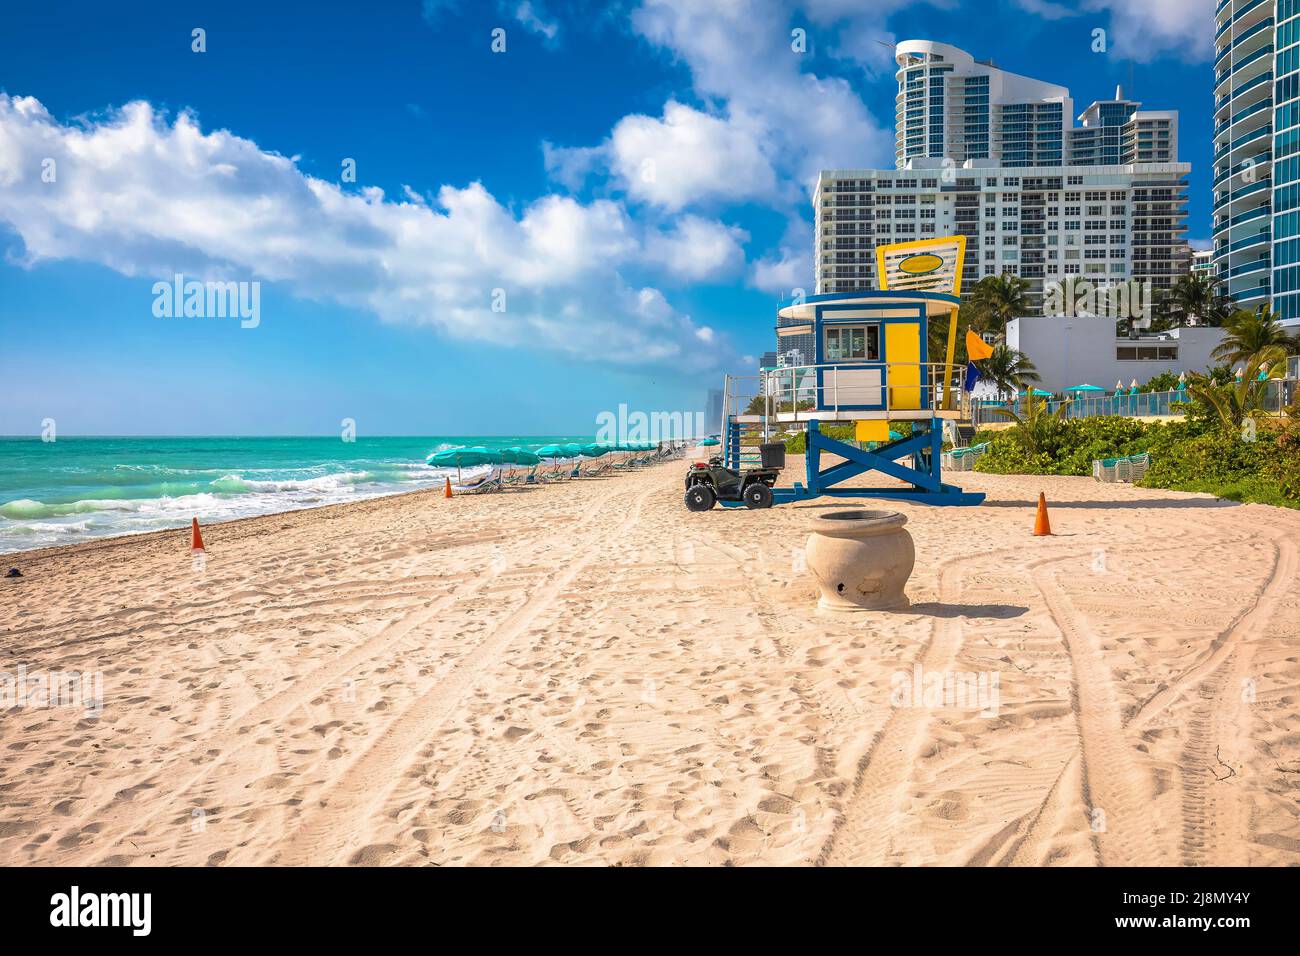 Turquoise sand ocean beach and waterfront in Hollywood, Florida view, United states of America Stock Photo